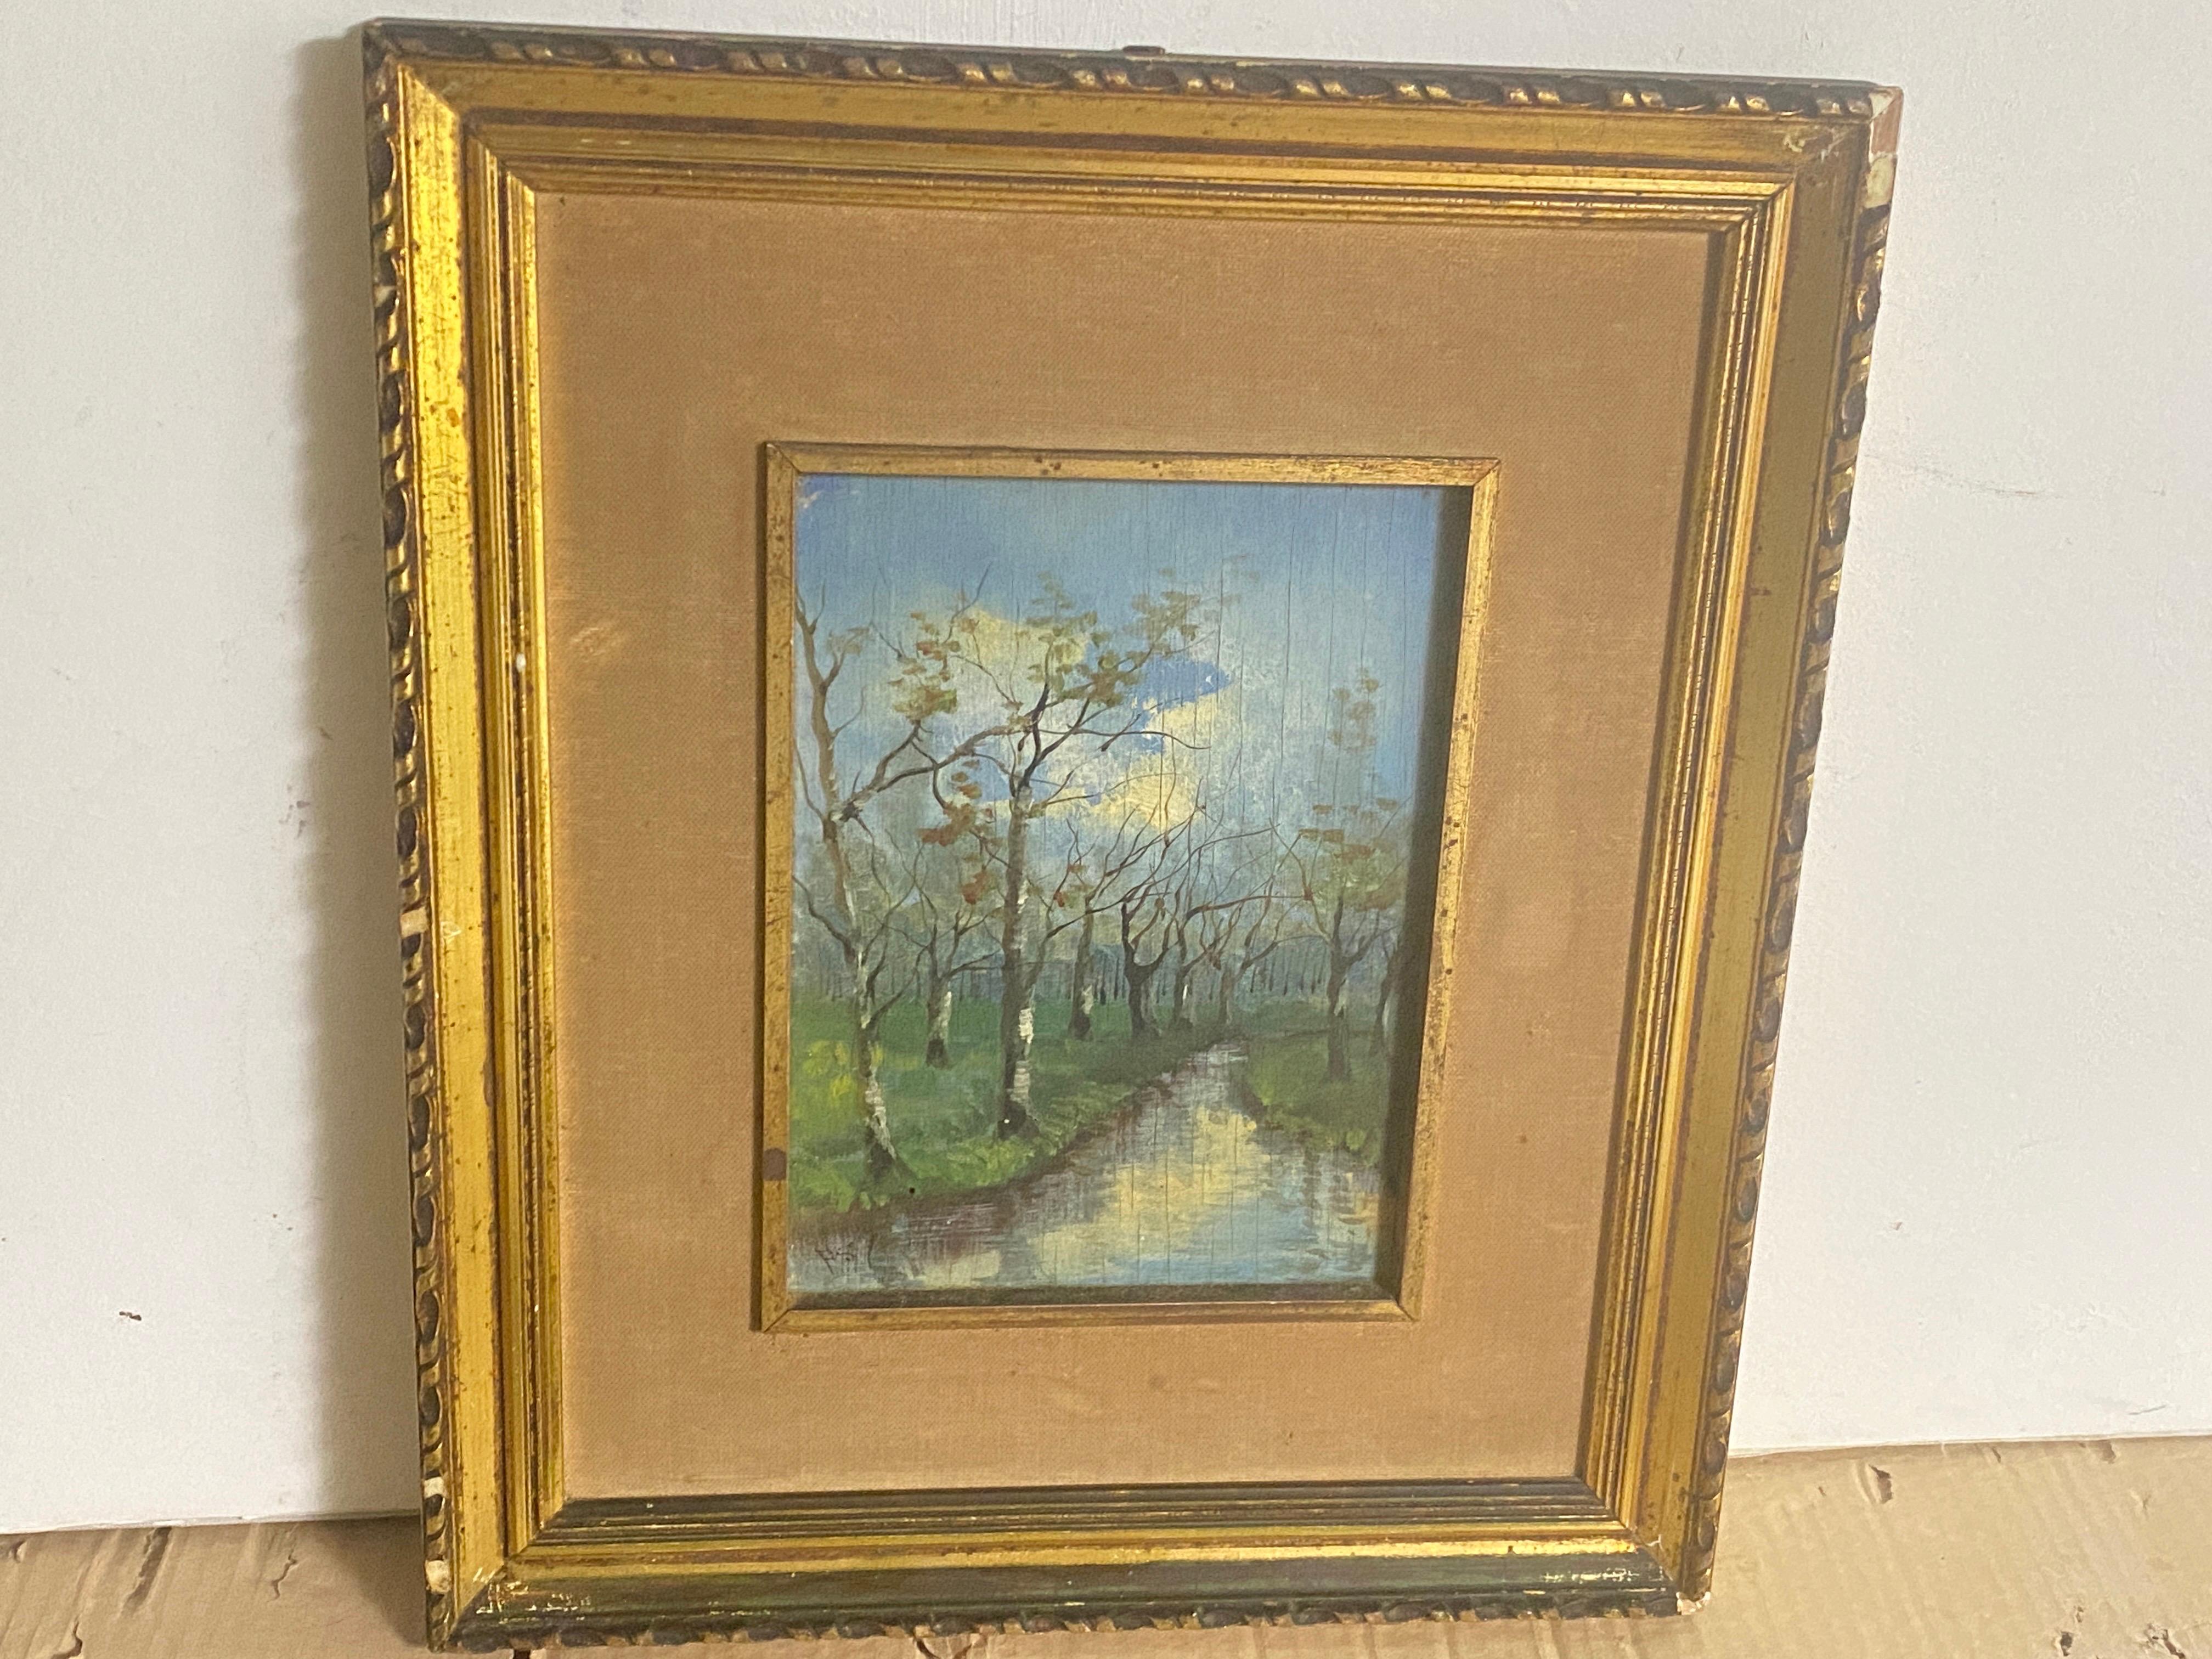 Original Oil Painting Representing a River and Trees Fance Early 20th Century For Sale 8